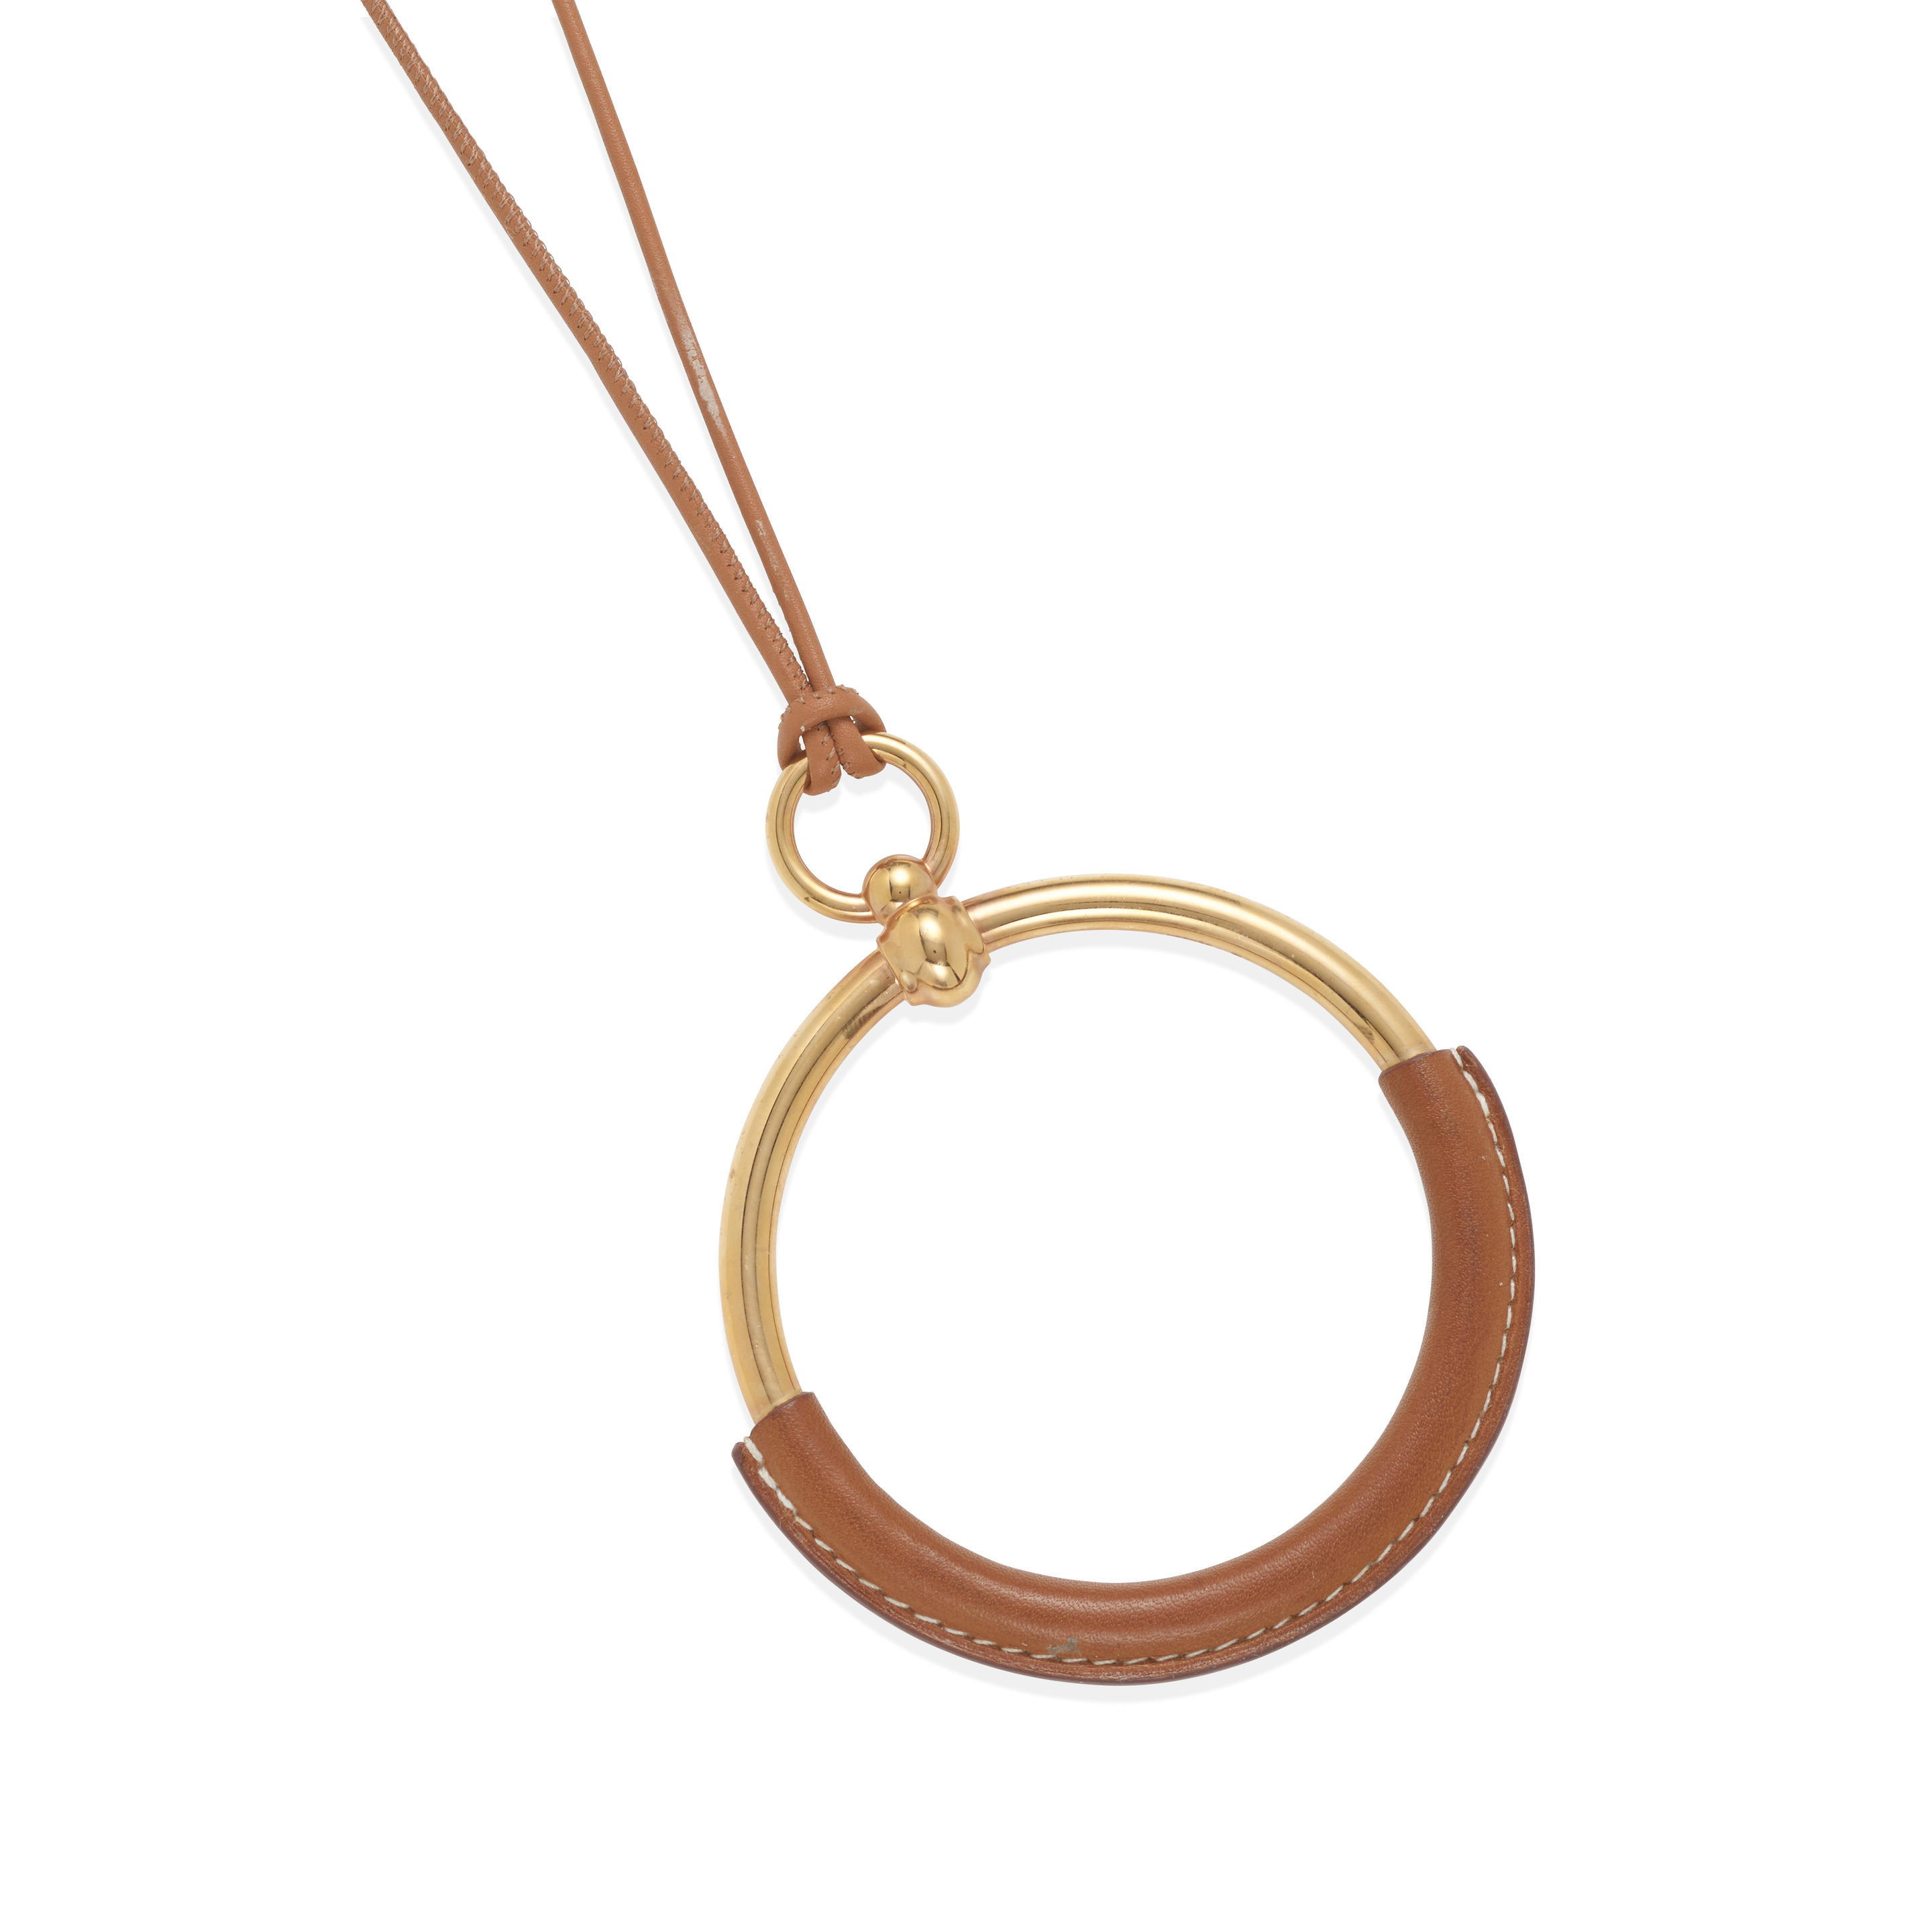 HERMES: A GOLD TONE AND LEATHER 'KYOTO TRESSE' NECKLACE, FRANCE